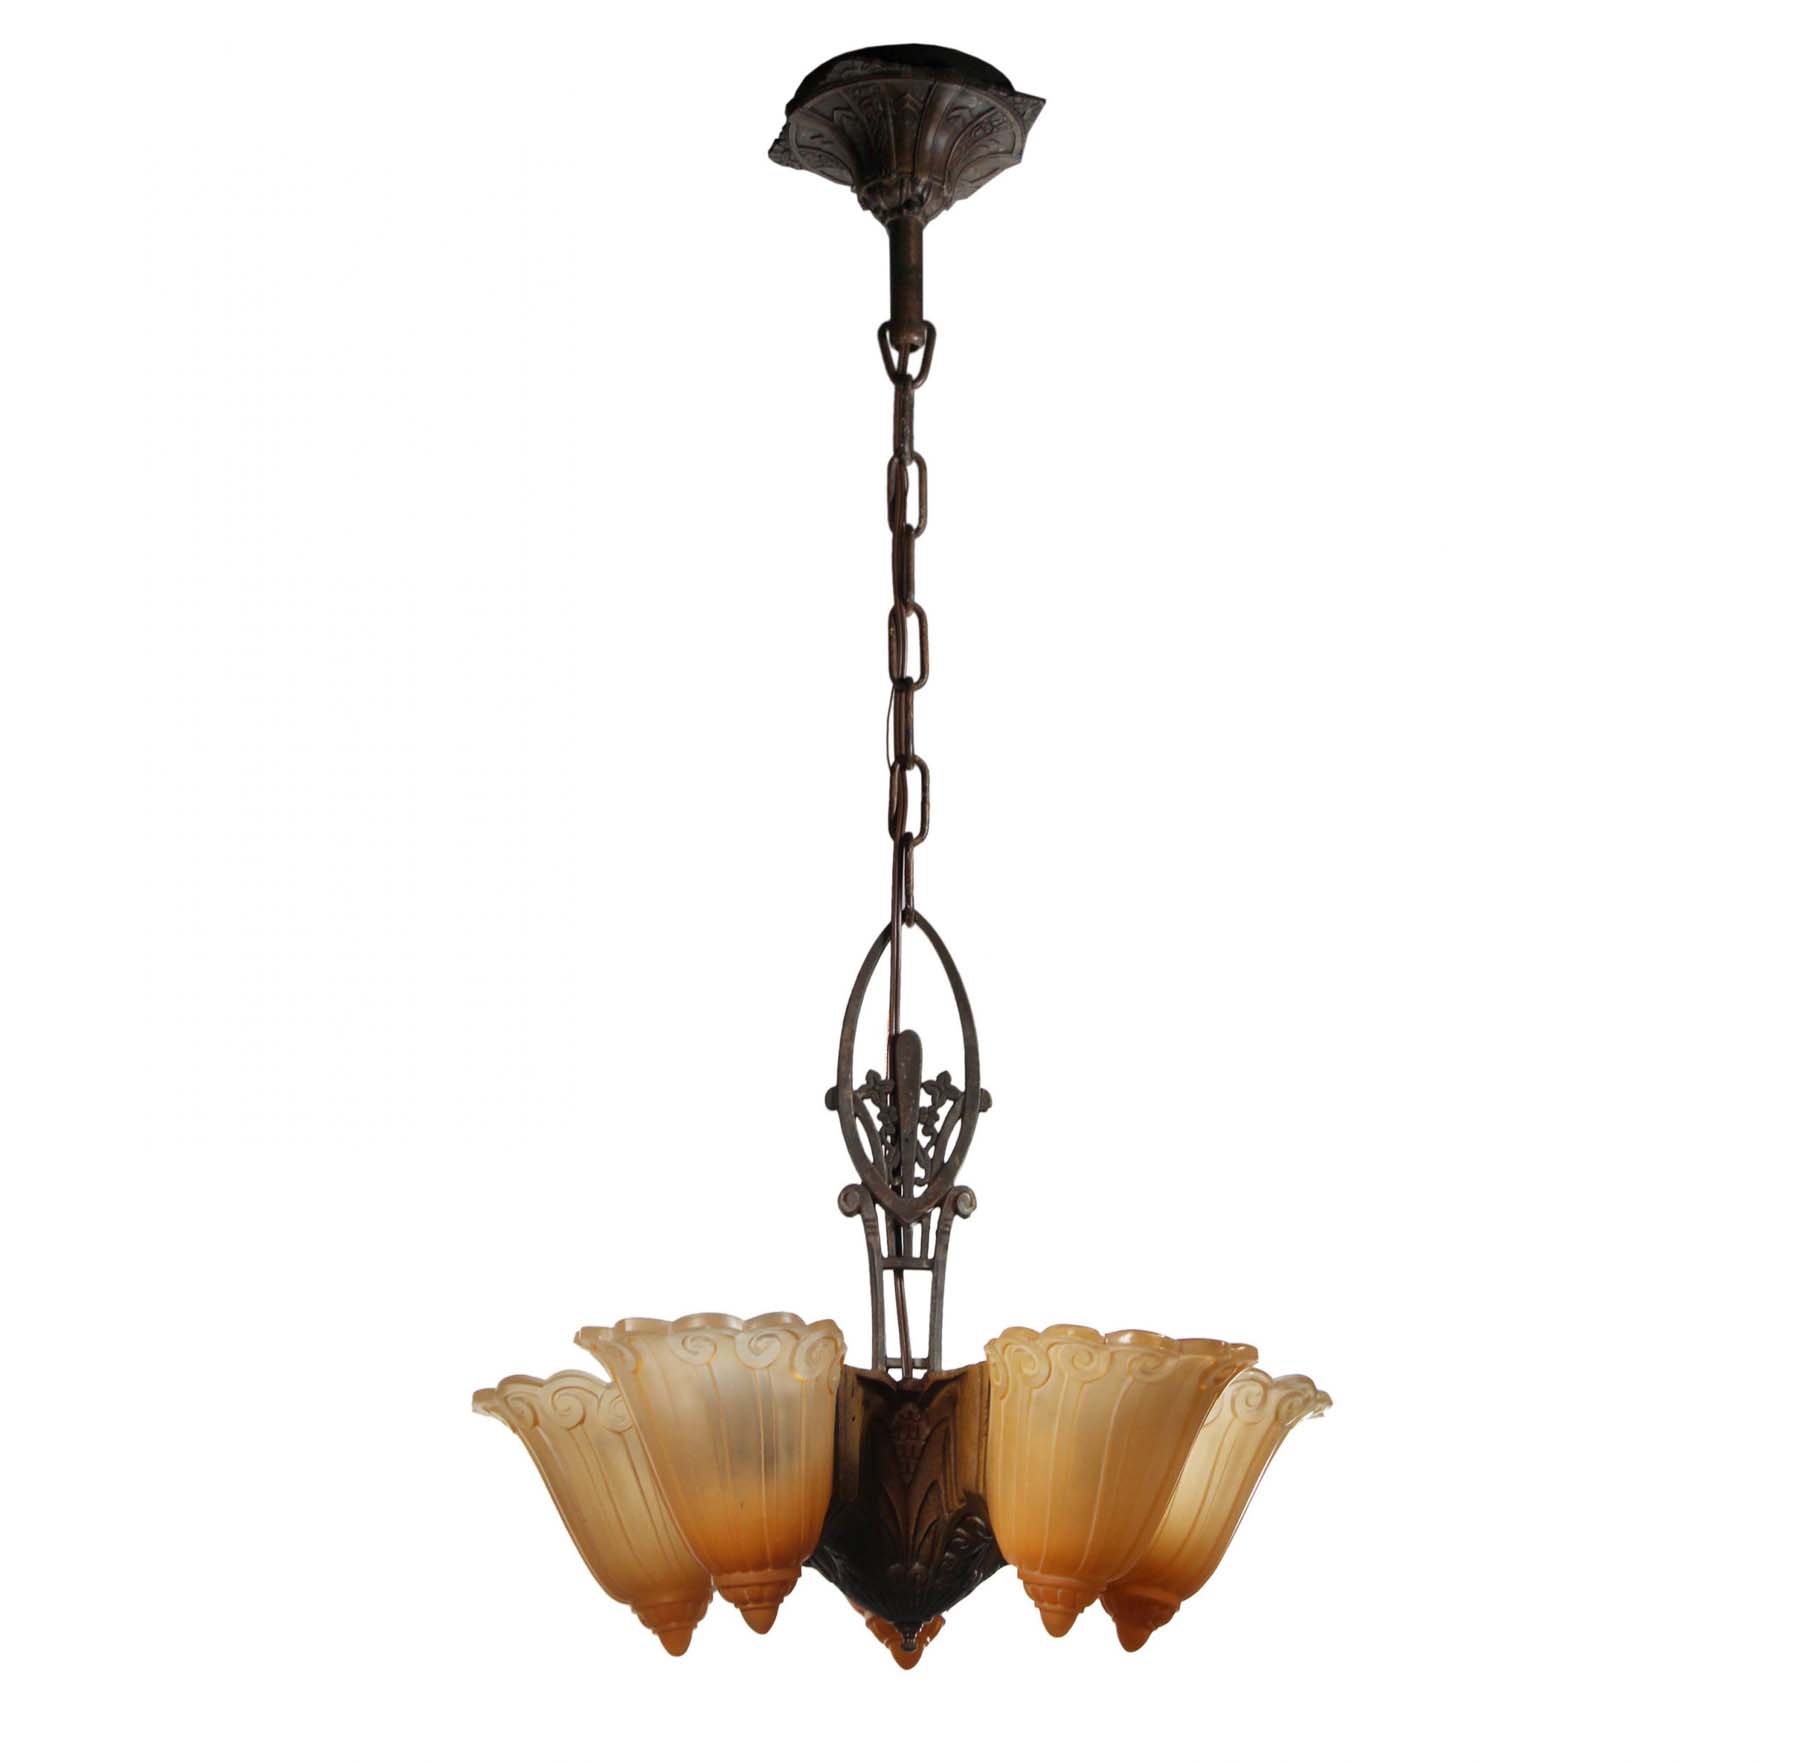 SOLD Art Deco Slip Shade Chandelier by Lincoln, Antique Lighting-68423